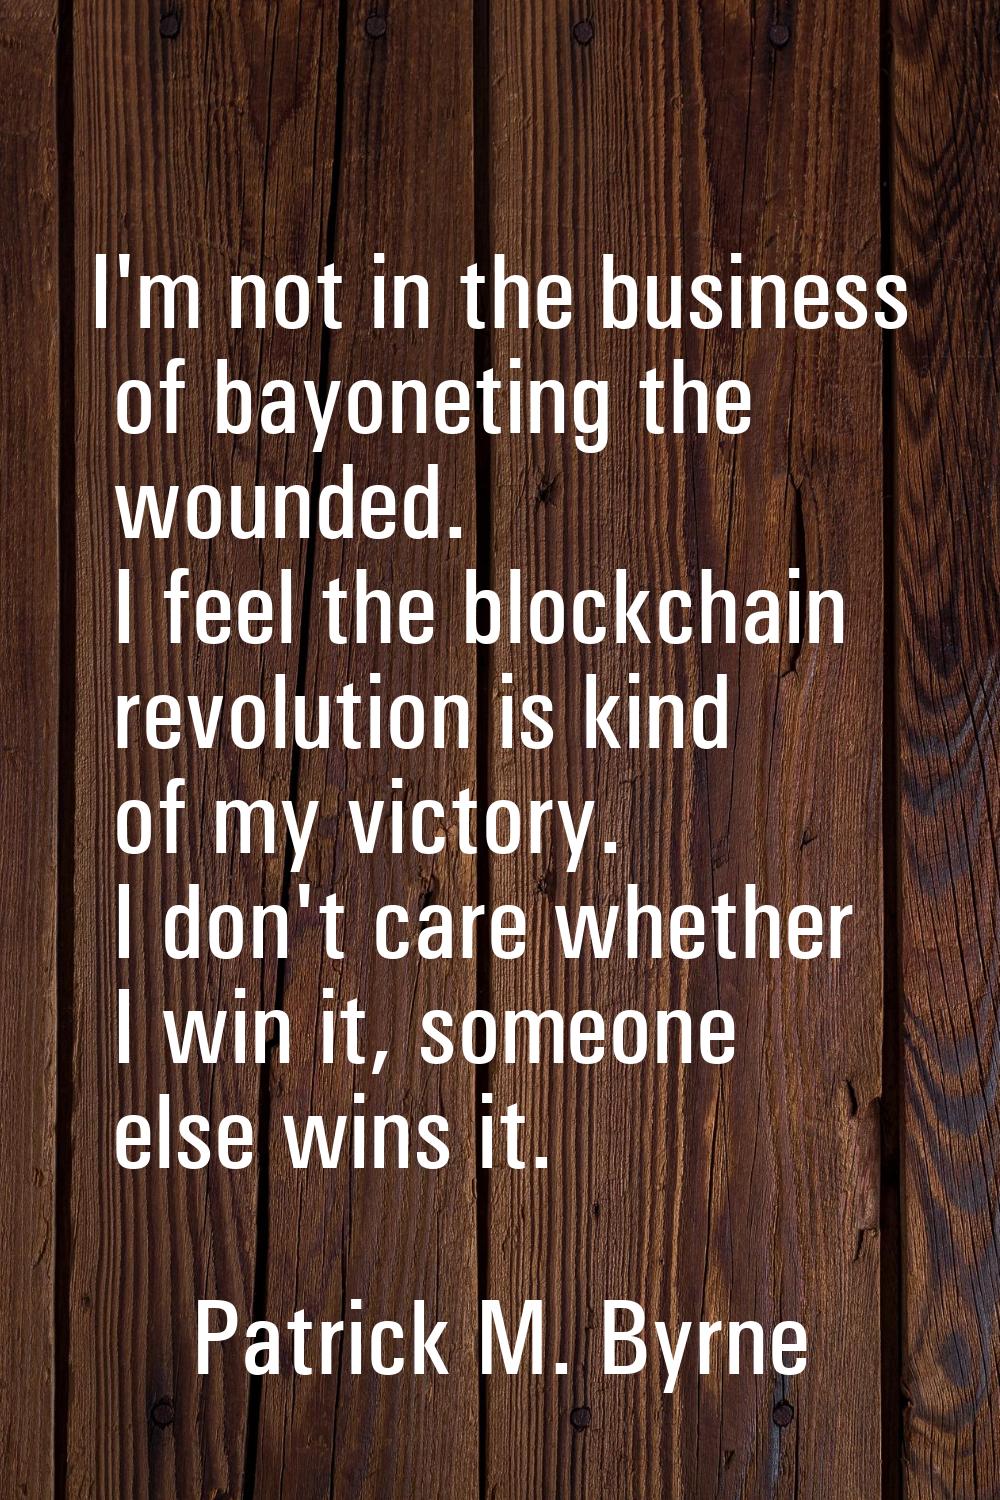 I'm not in the business of bayoneting the wounded. I feel the blockchain revolution is kind of my v